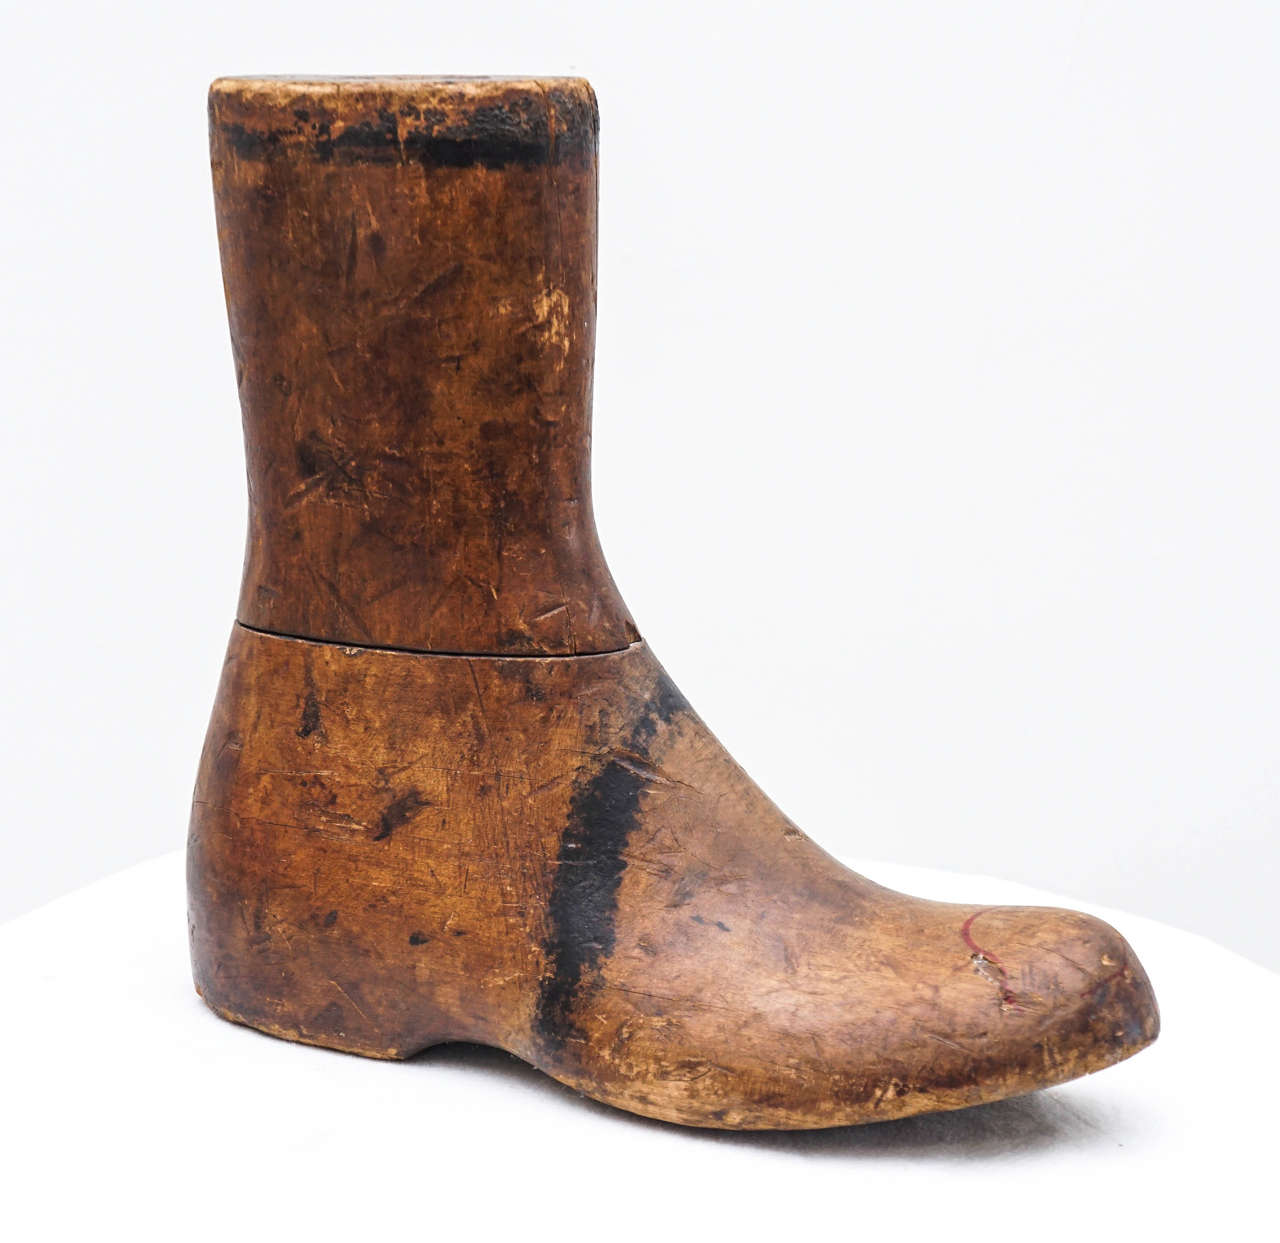 this wooden boot has very nice age to it.
its sculptural and stands solid.
a great rustic find.